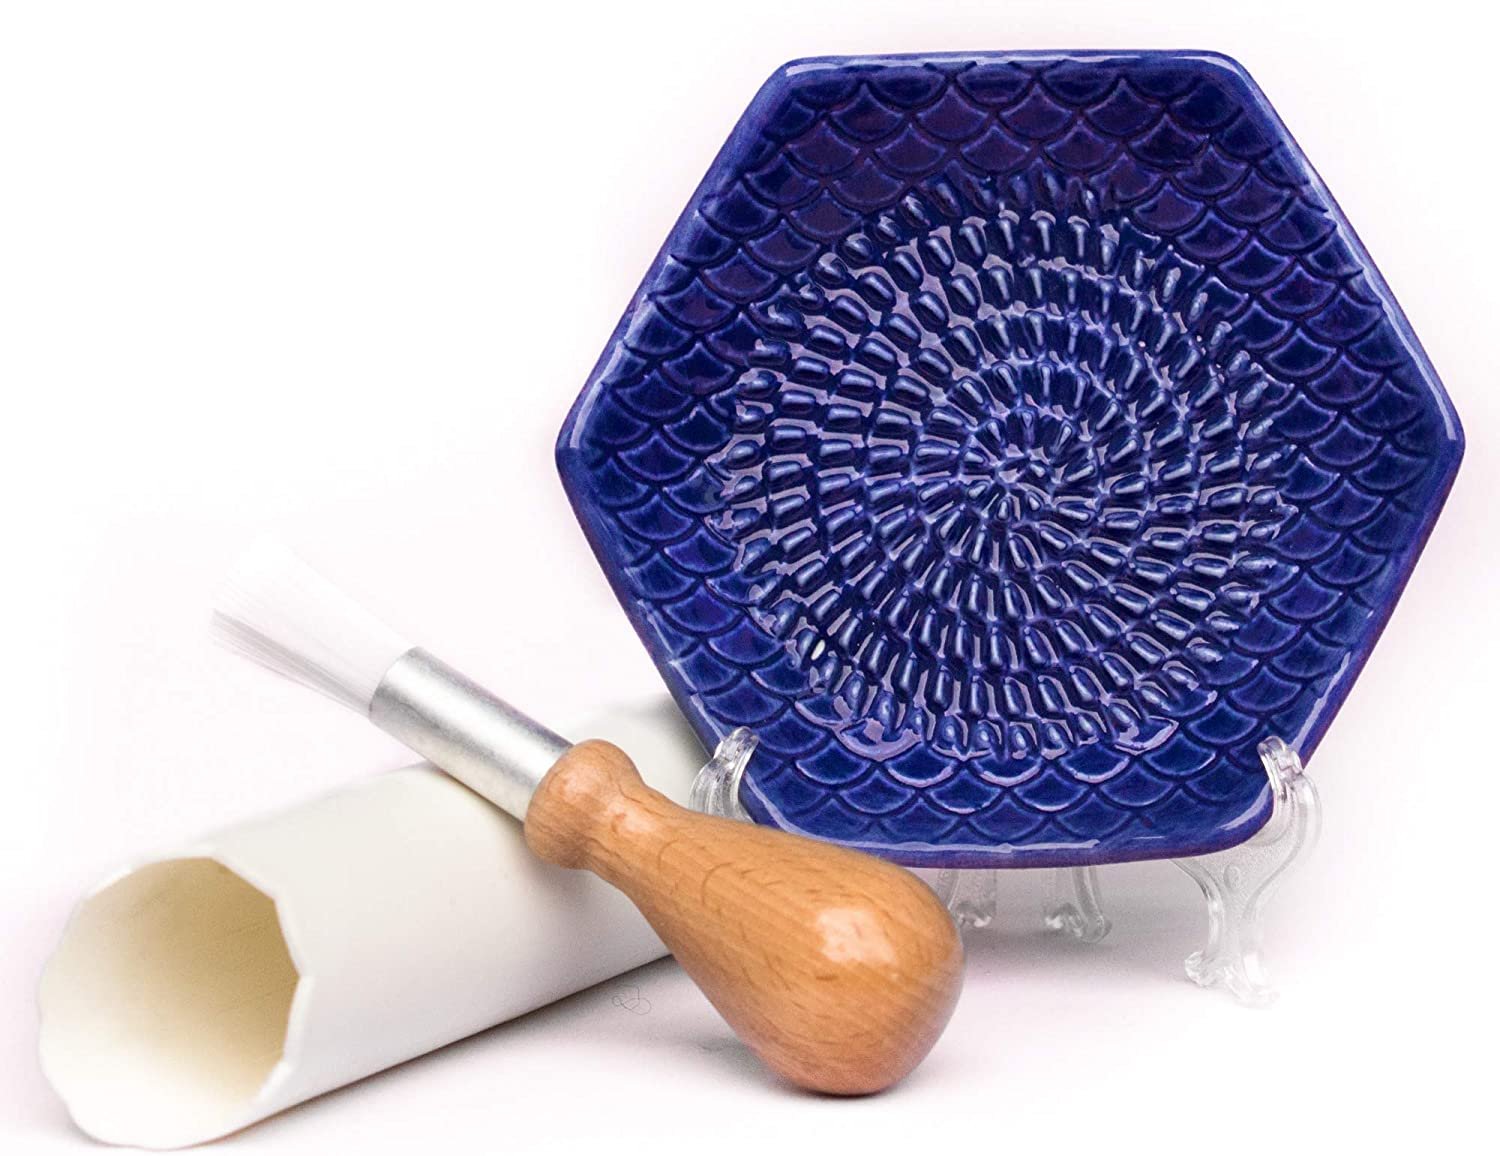 The Grate Plate Garlic Grater